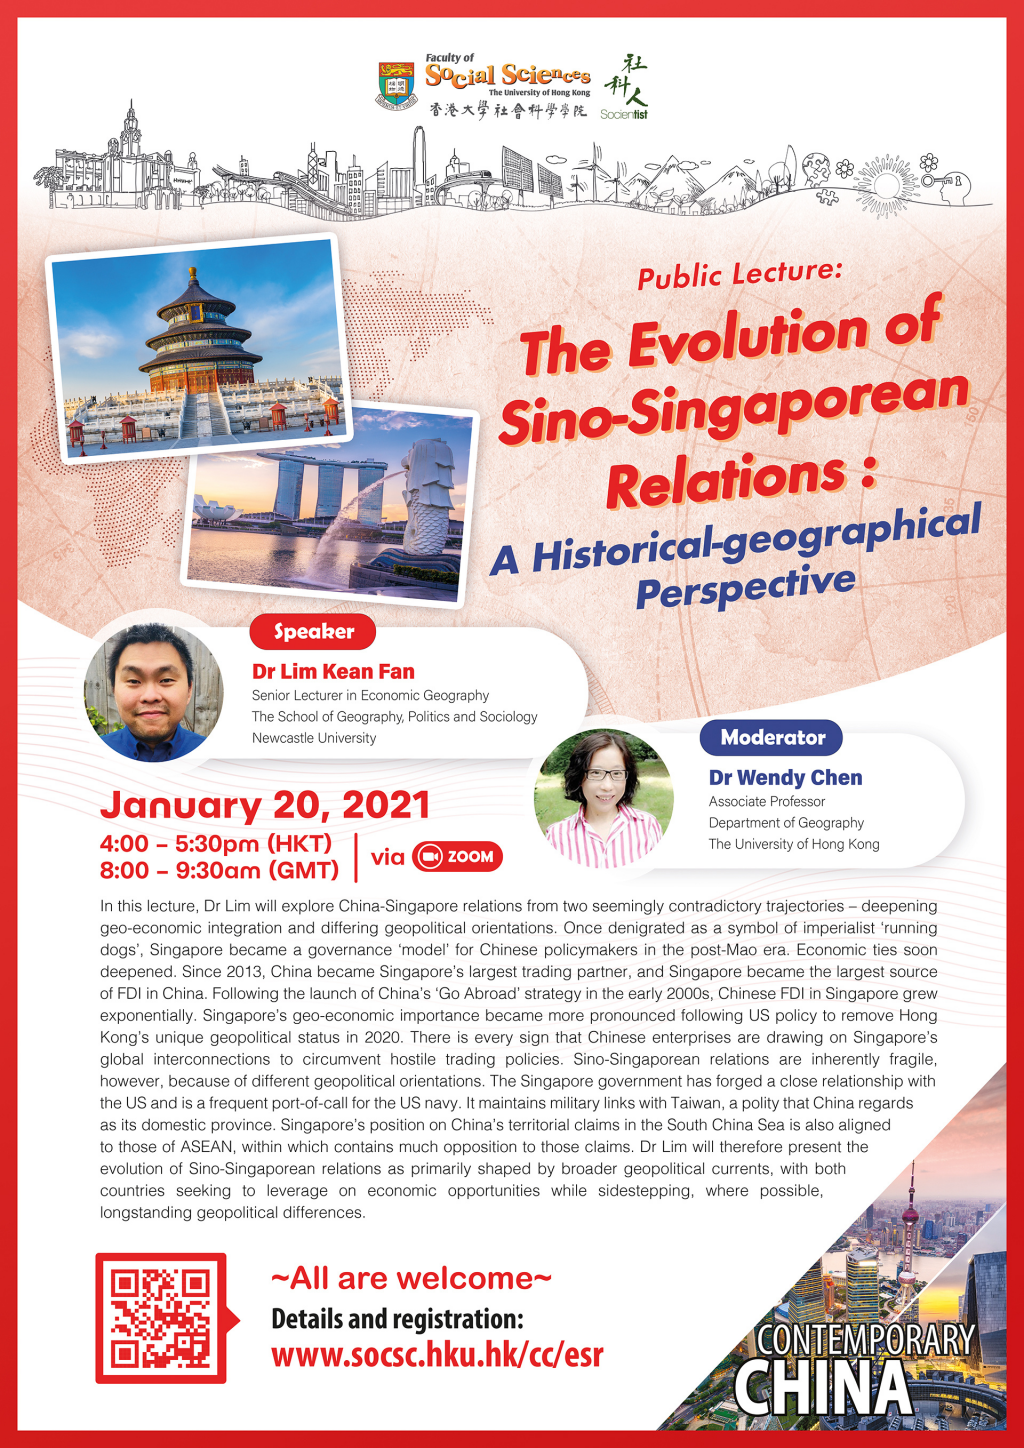 Contemporary China Public Lecture - The Evolution of Sino-Singaporean Relations: A Historical-geographical Perspective (January 20, 4pm)